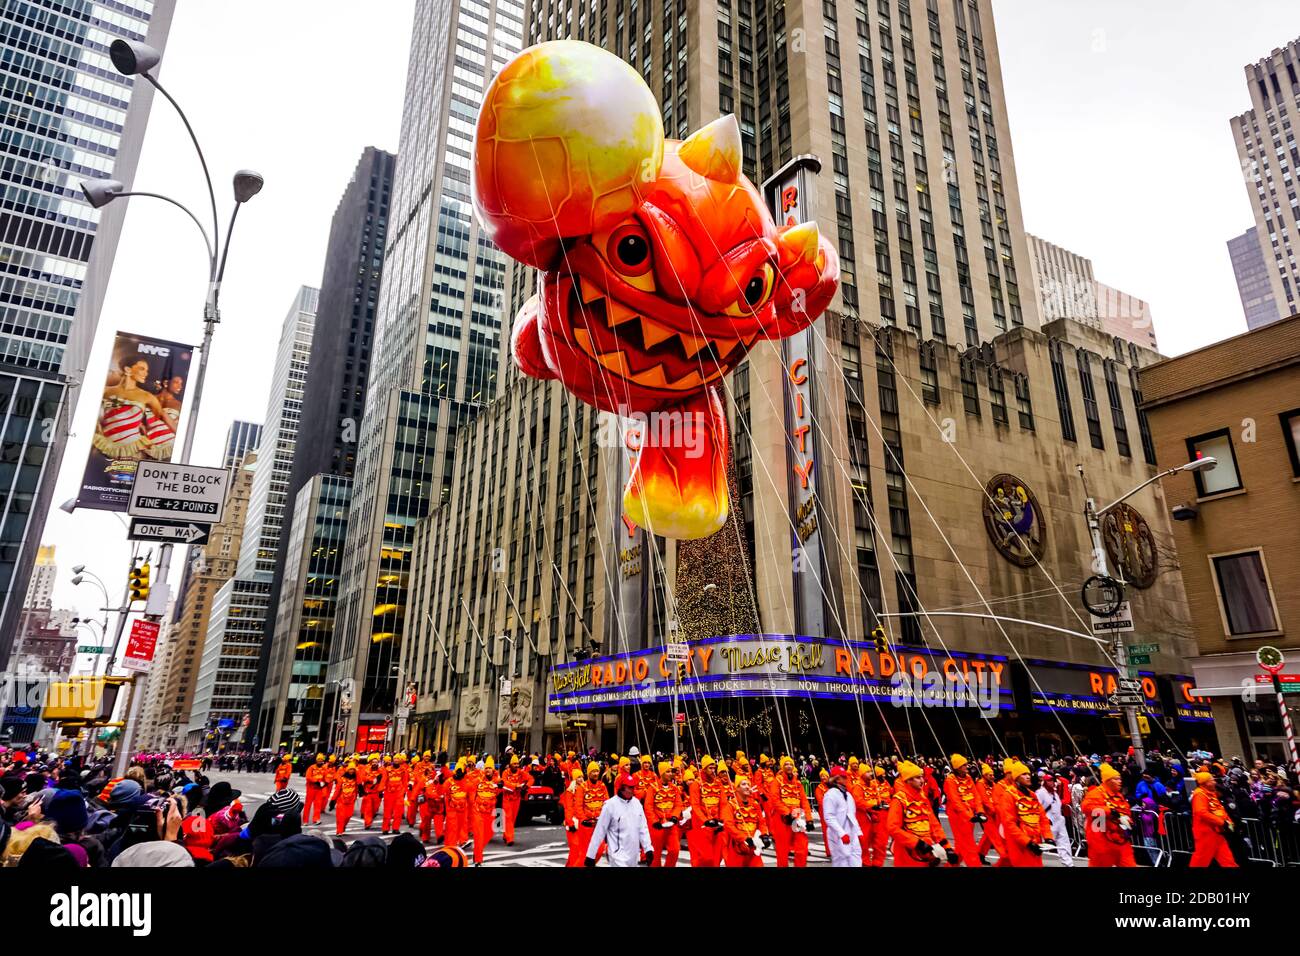 Skylander Eruptor balloon floats in the air during Macy's Thanksgiving Day parade along Avenue of Americas with the Radio Music Hall in the background Stock Photo